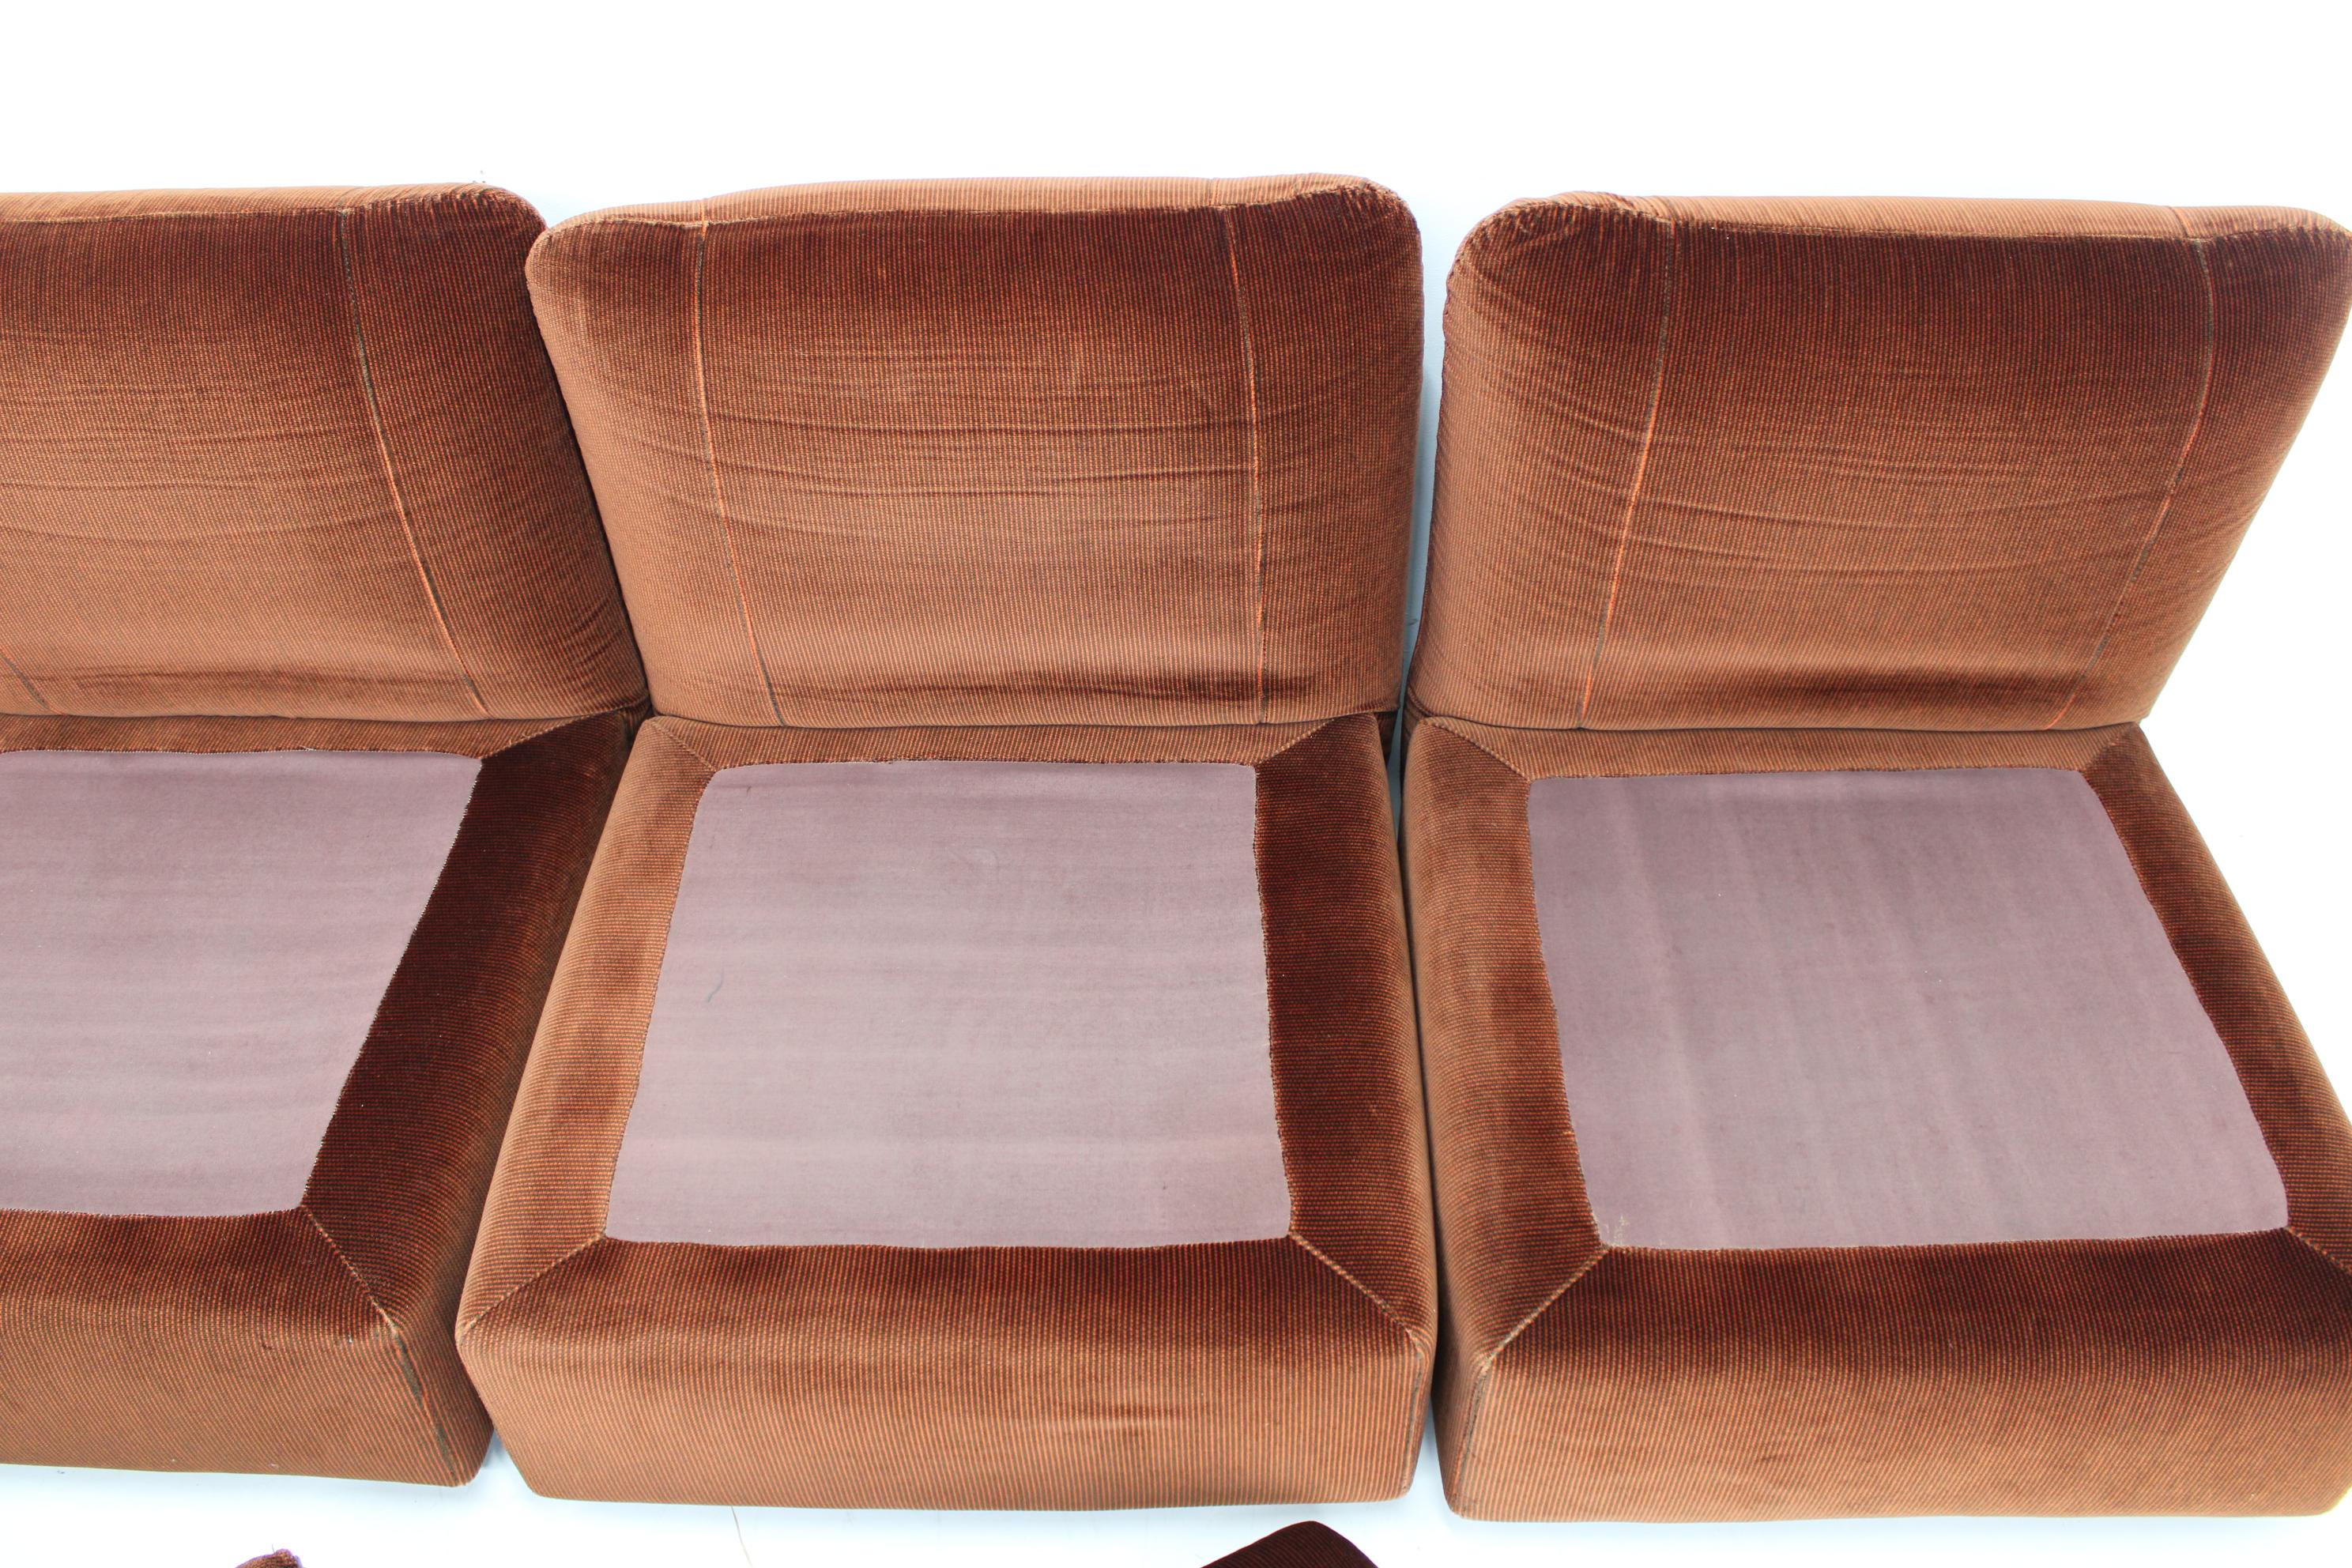 Late 20th Century 1970s Modular Sofa or Chairs, Italy For Sale